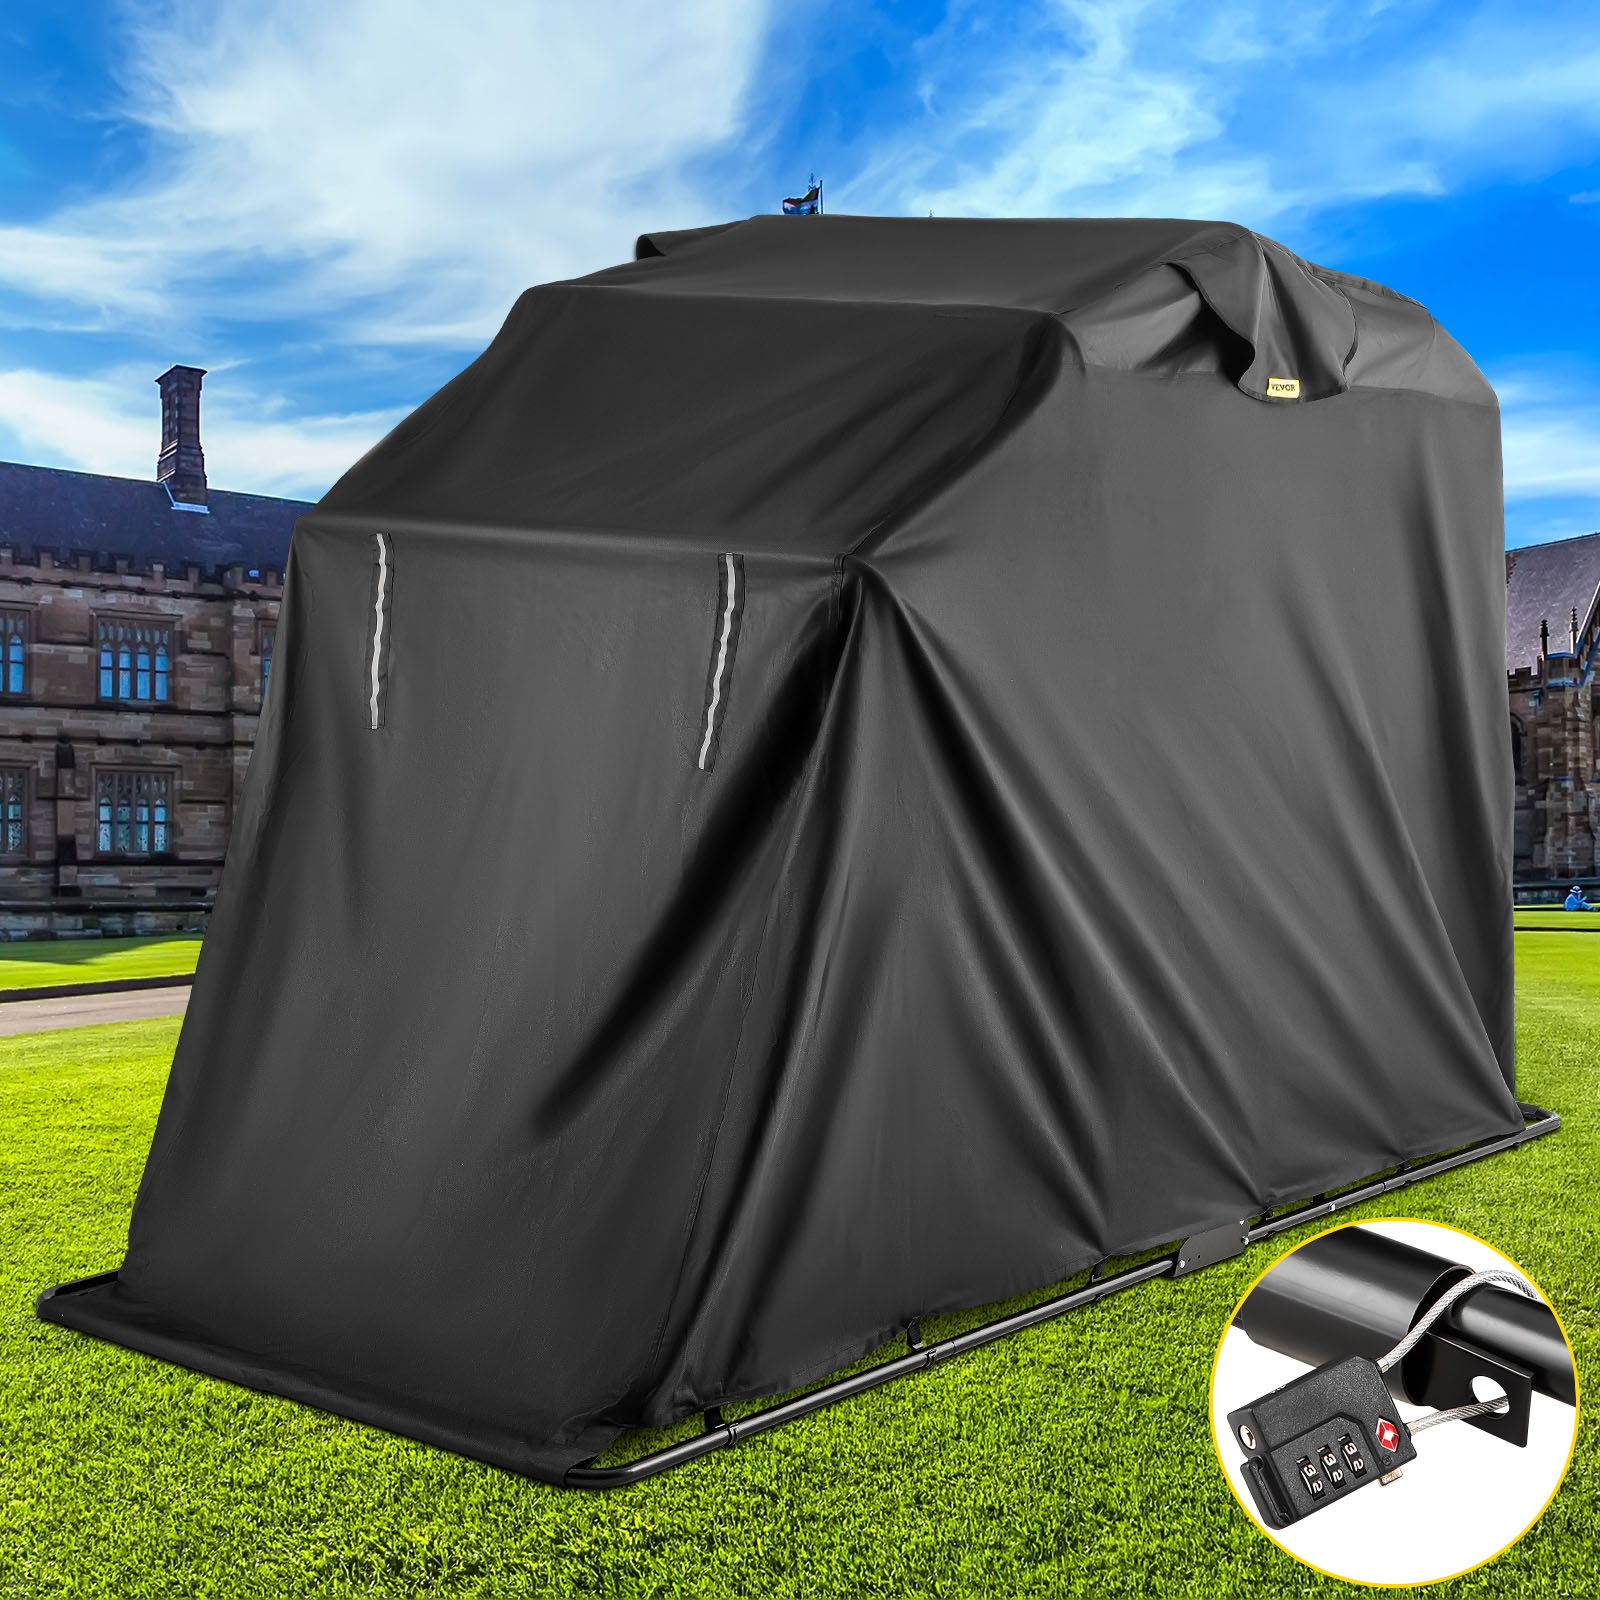 VEVOR Motorcycle Shelter, Waterproof Motorcycle Cover, Heavy Duty Motorcycle Shelter Shed, 600D Oxford Motorbike Shed Anti-UV, 133.9x53.9x76.8 inch